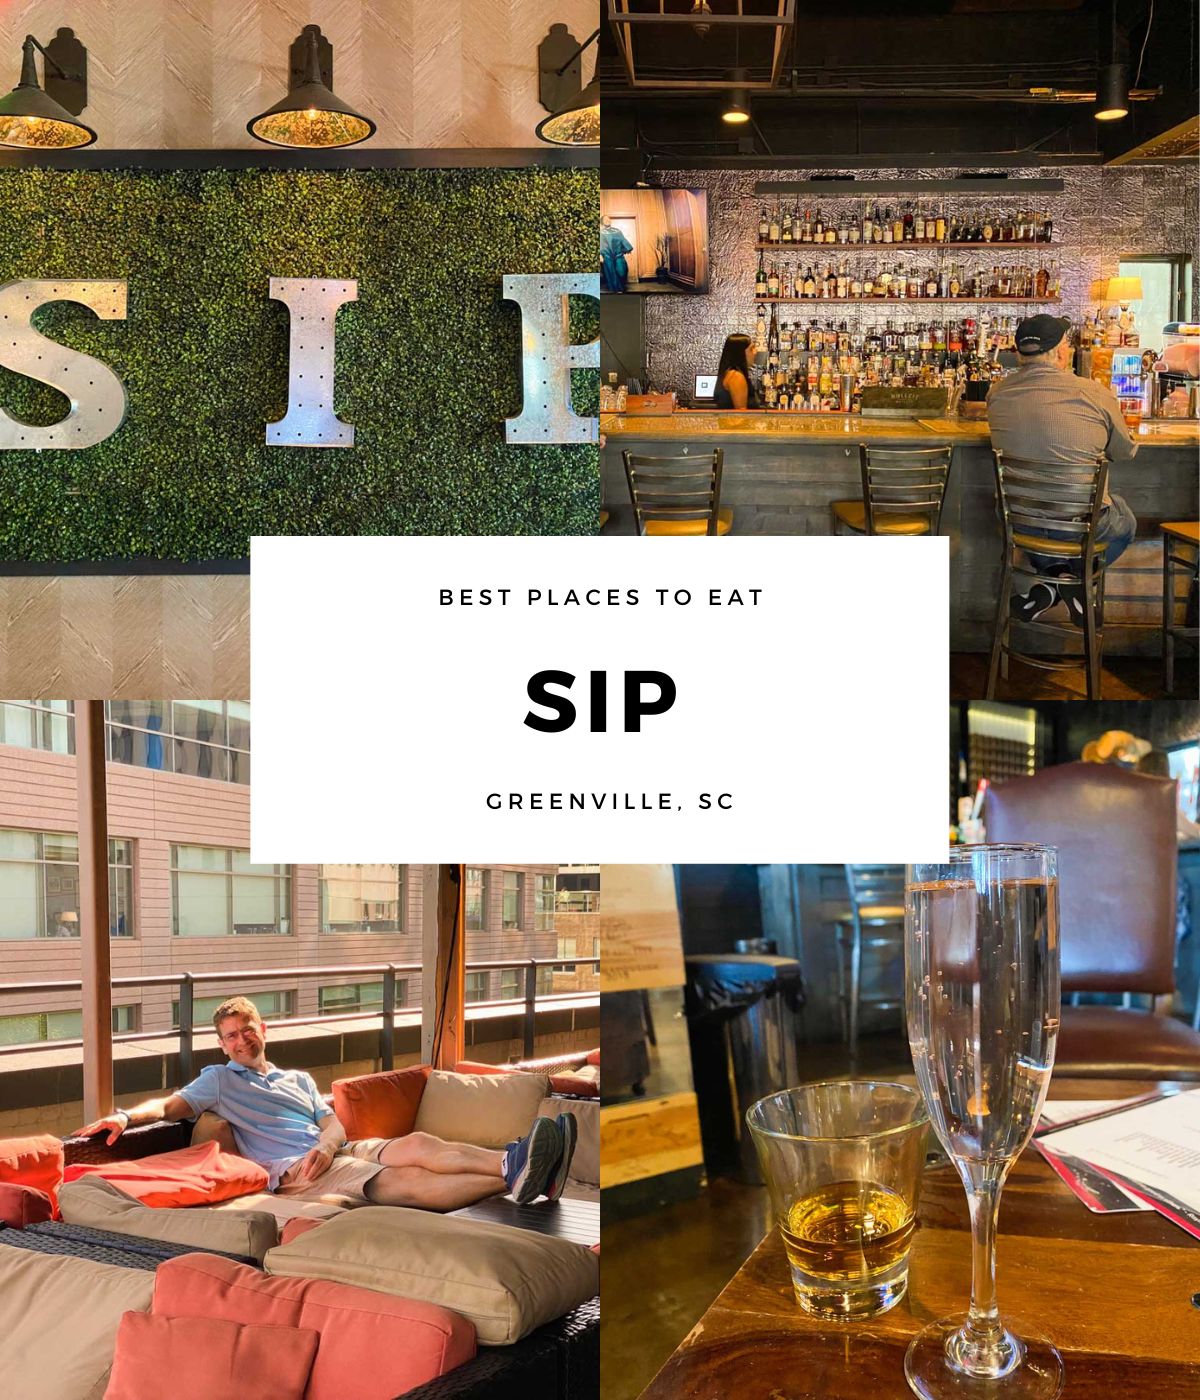 A photo collage of scenes from inside Sip.